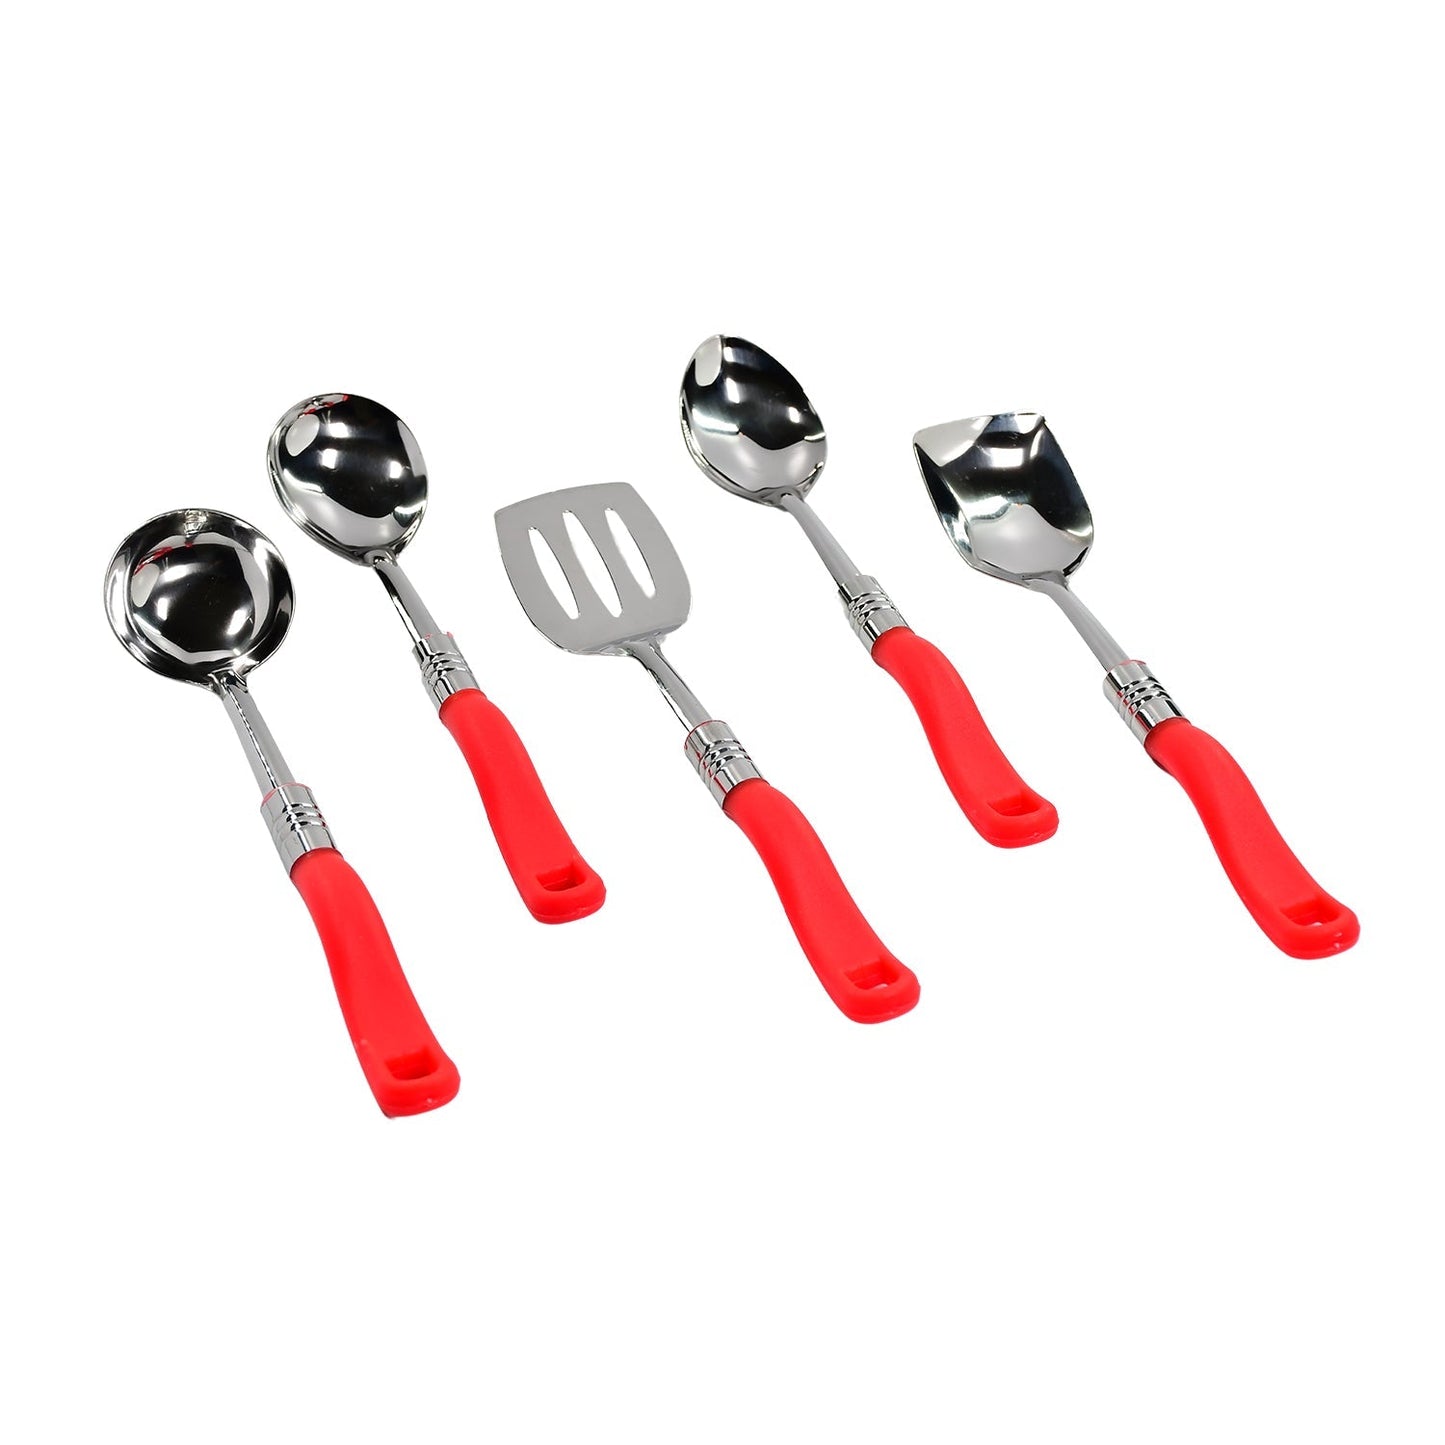 2935 Stainless Steel Serving Spoon Set 5 pcs.